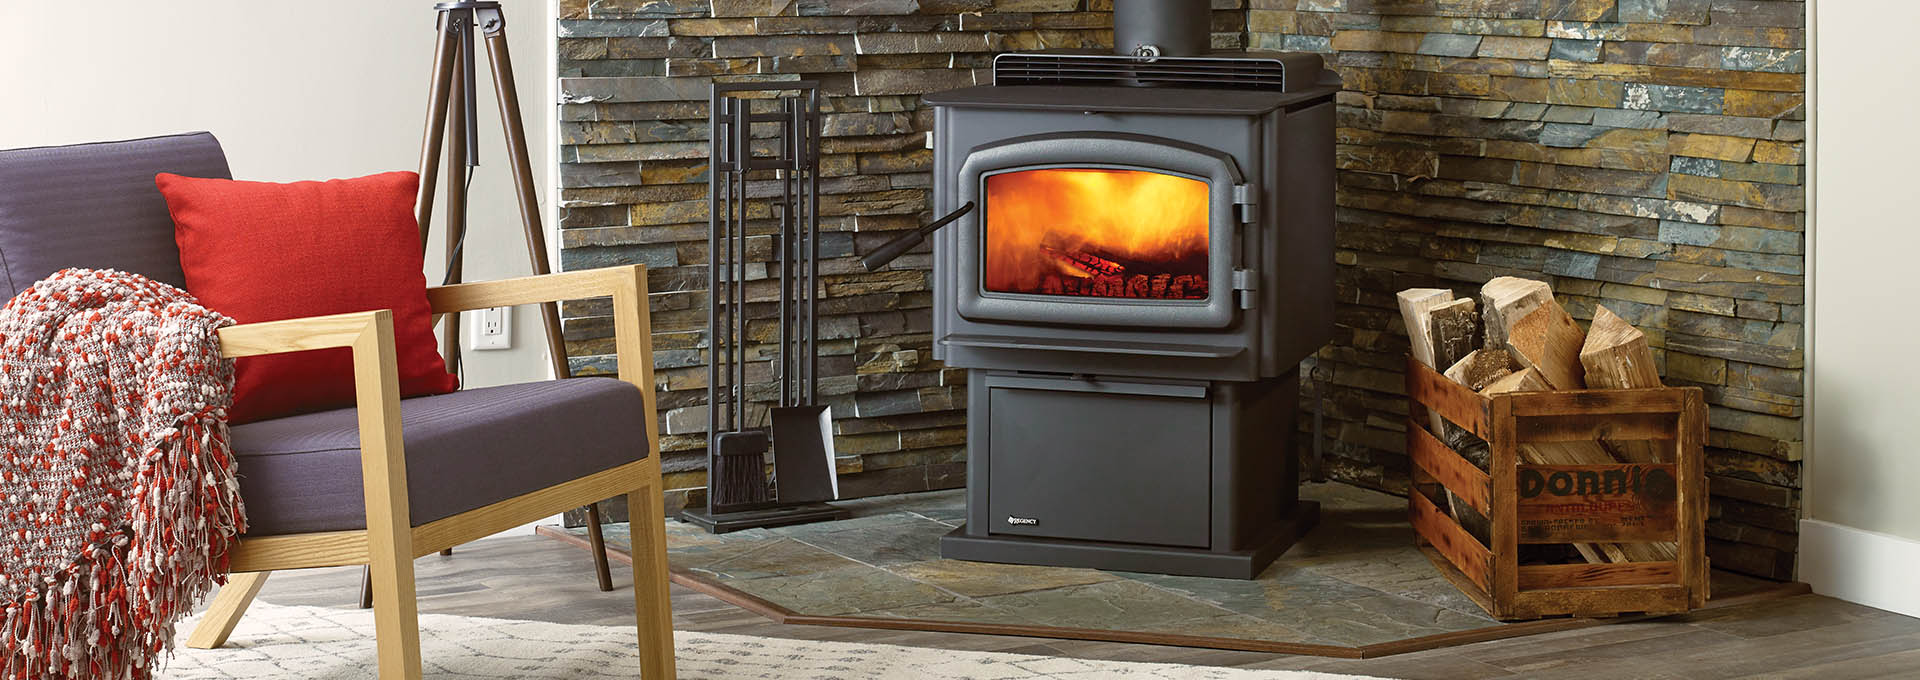 Regency F2500 Wood Stove lit in front of staggered stone heat shield with living room chair and wood pile next to it